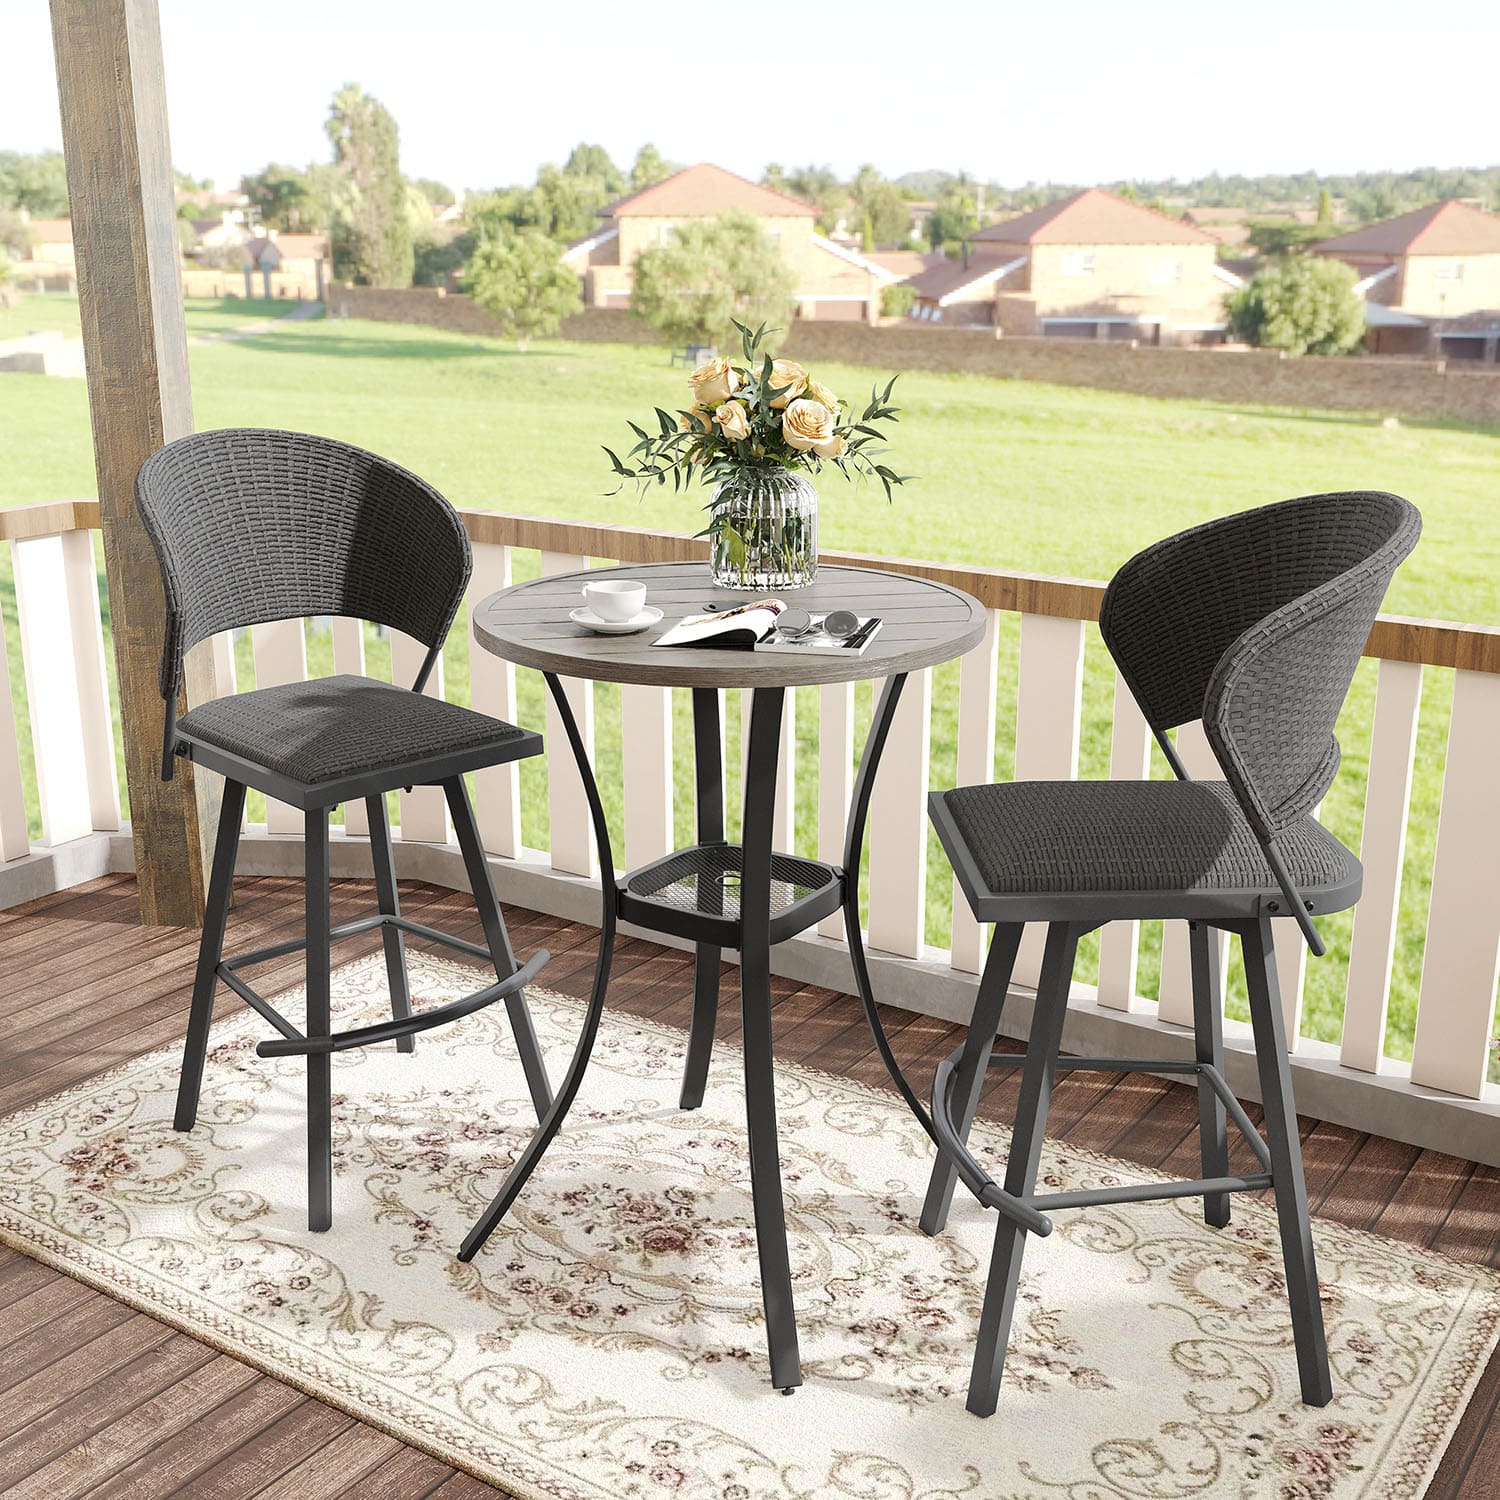 Vicllax 3/5 PCS Swivel Bar Set, Patio Wicker Bar Chairs and Round Bar Table